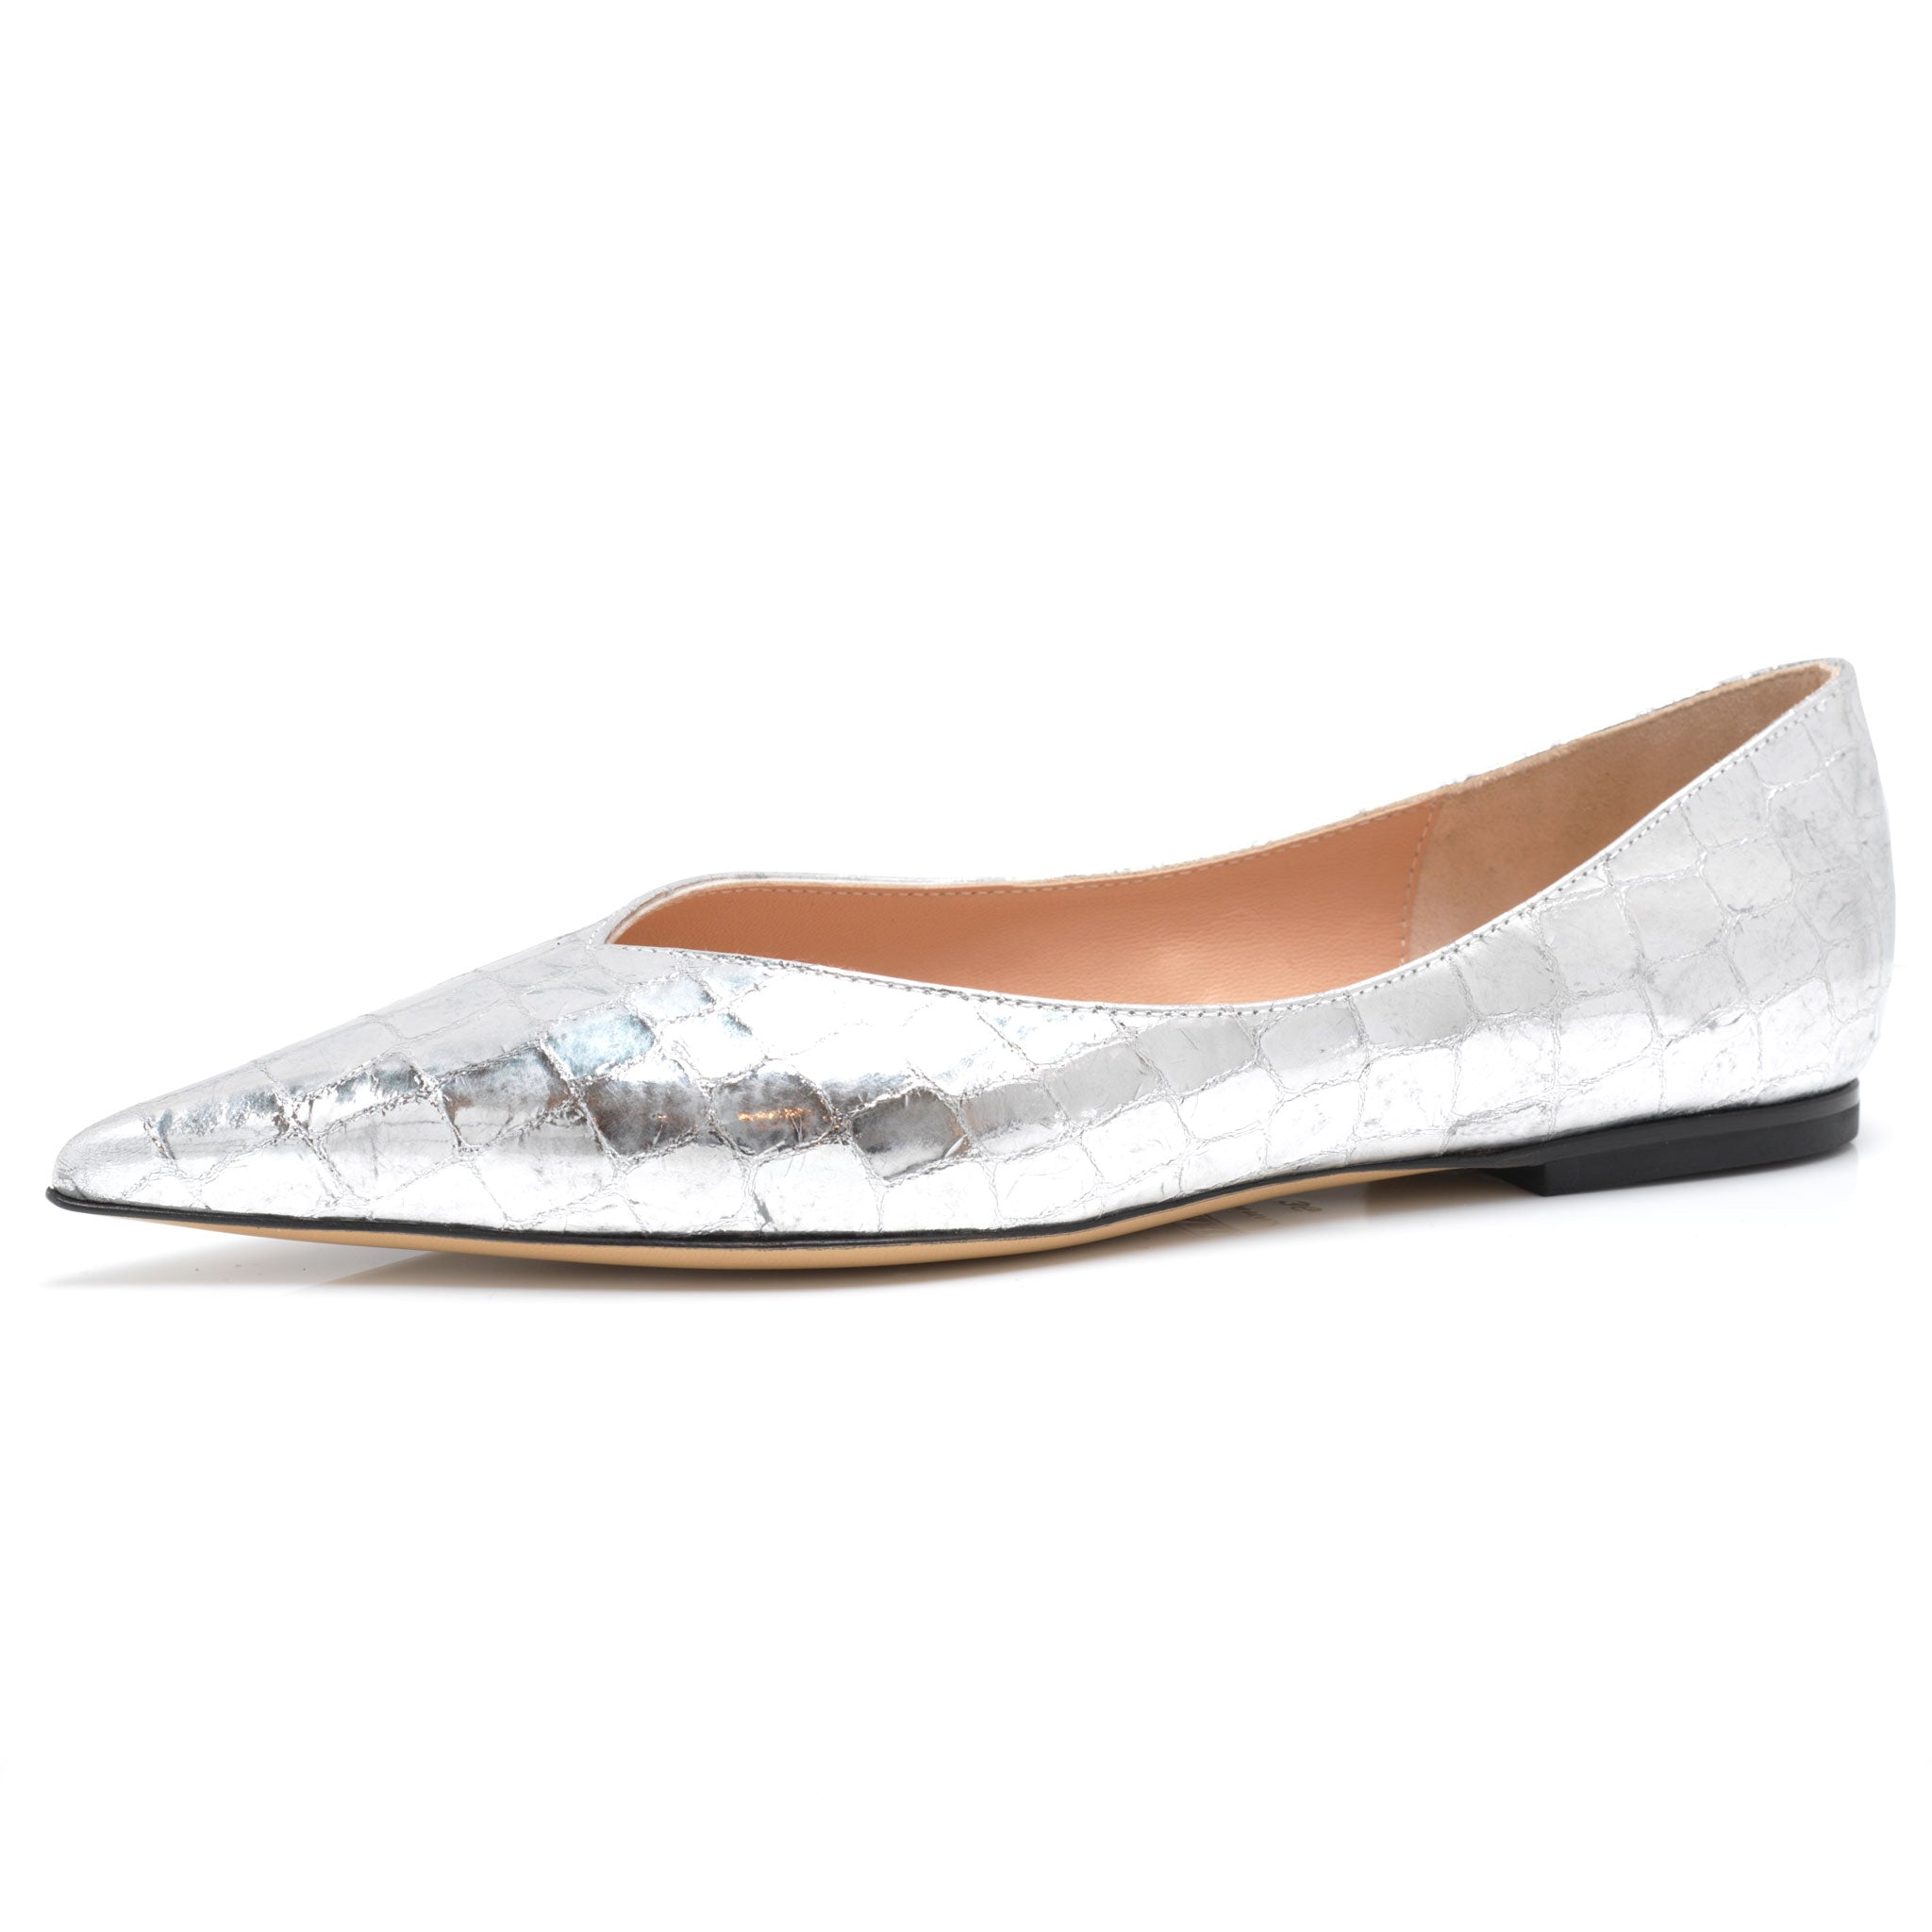 womens high-fashion pointed toe leather flat shoes in a silver metallic leather. 